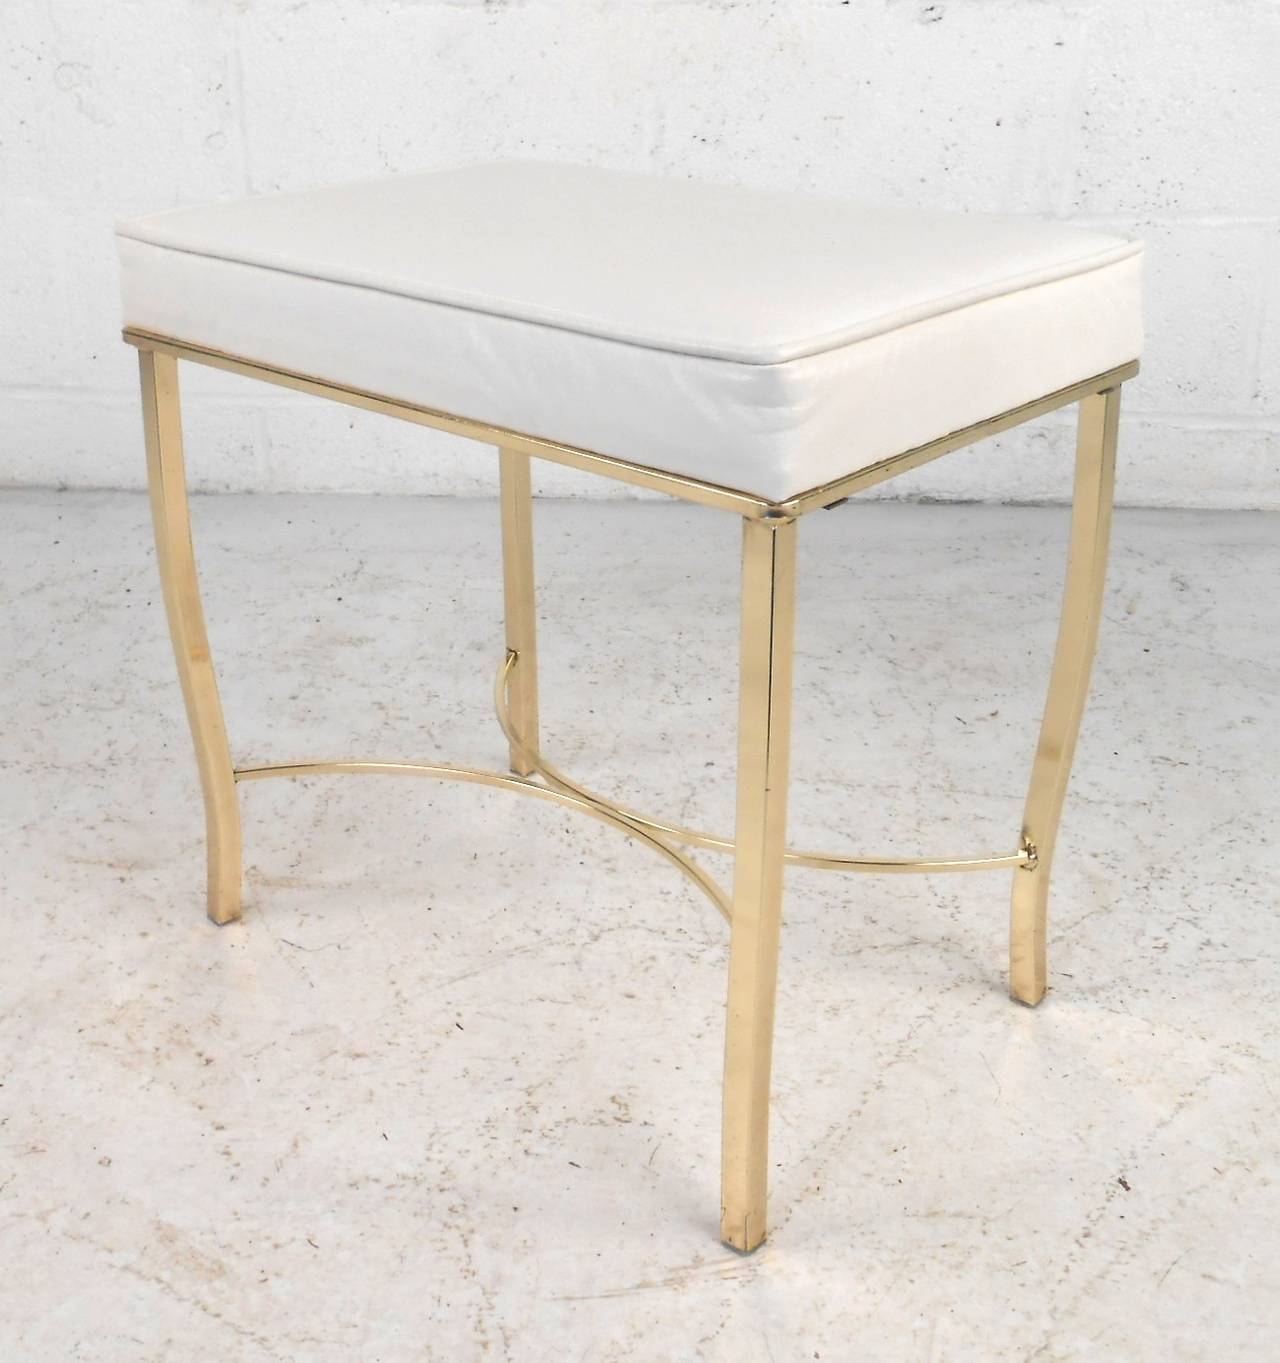 Mid-century modern ottoman/stool with white vinyl and metal frame. Attractive polished brass curved legs and stretcher accent the white fabric seat.

(Please confirm item location - NY or NJ - with dealer)